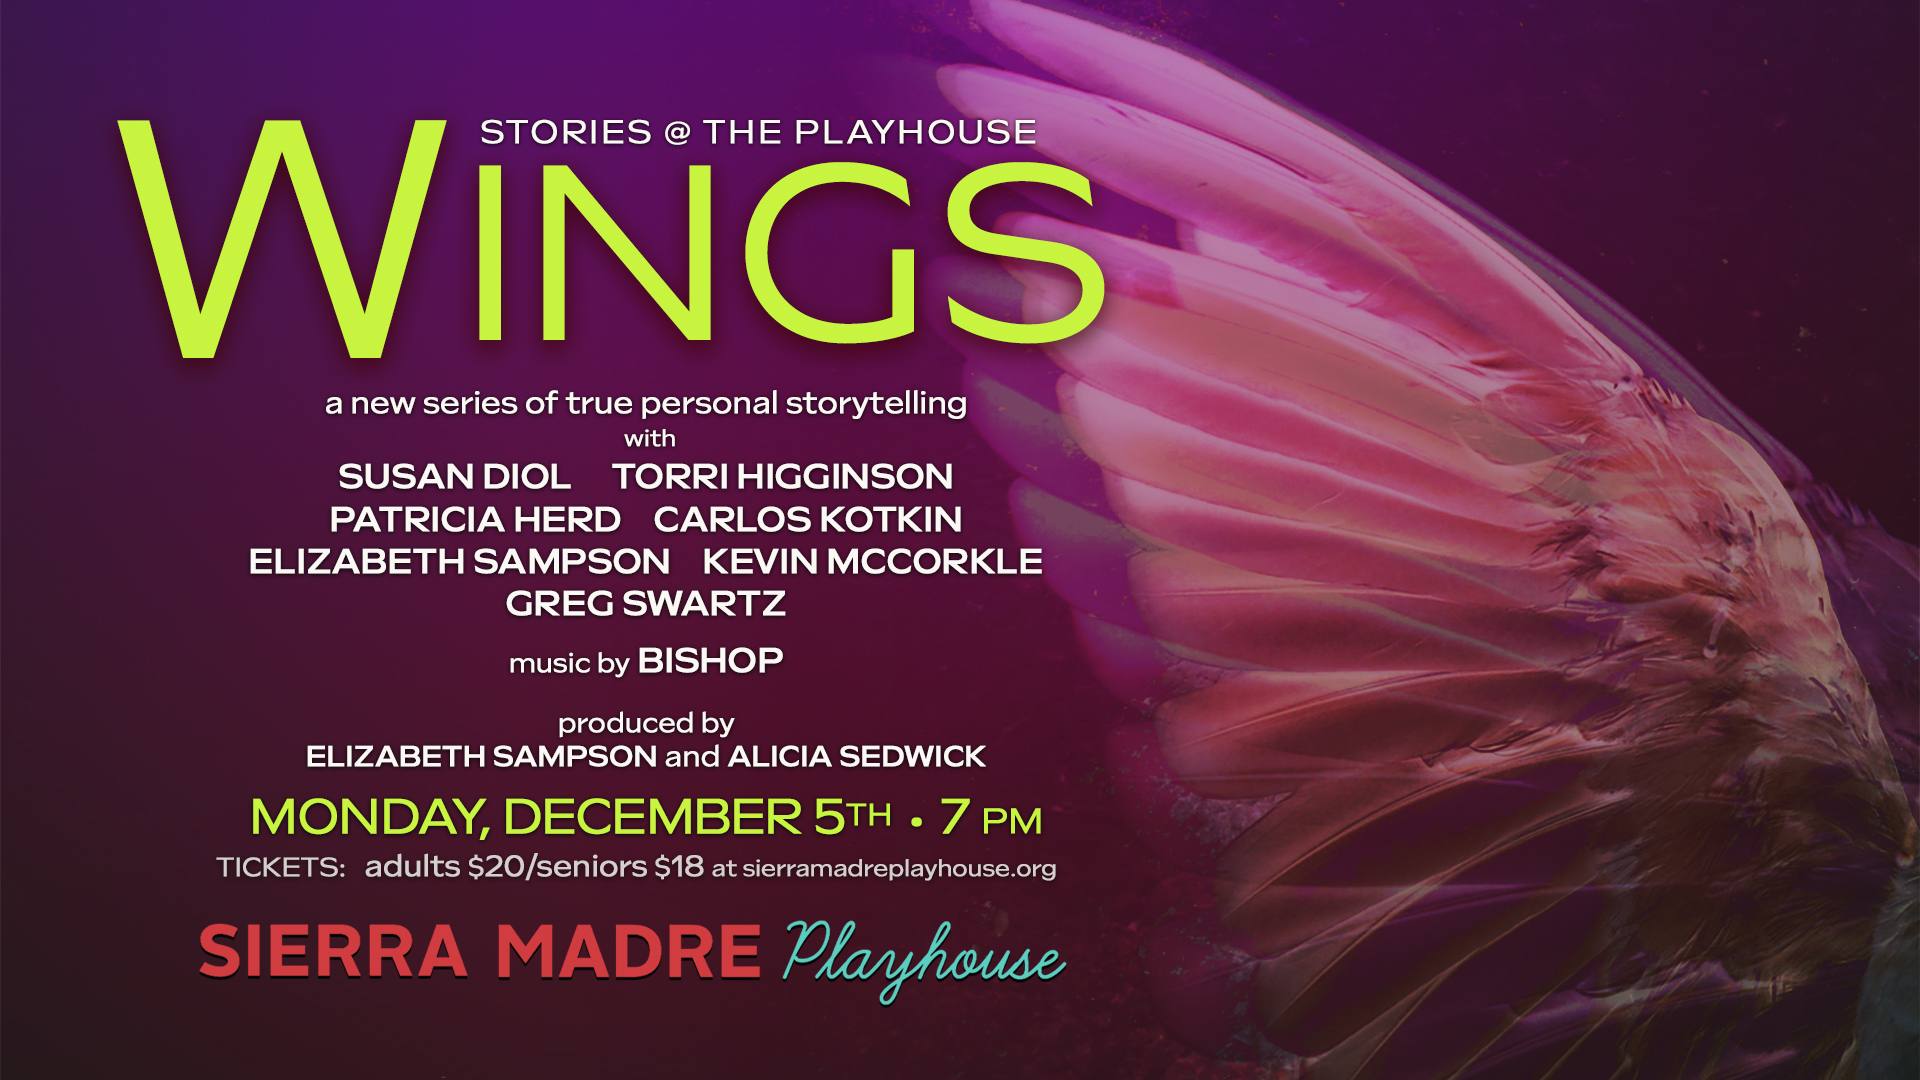 Graphic for "Stories @ The Playhouse: Wings"